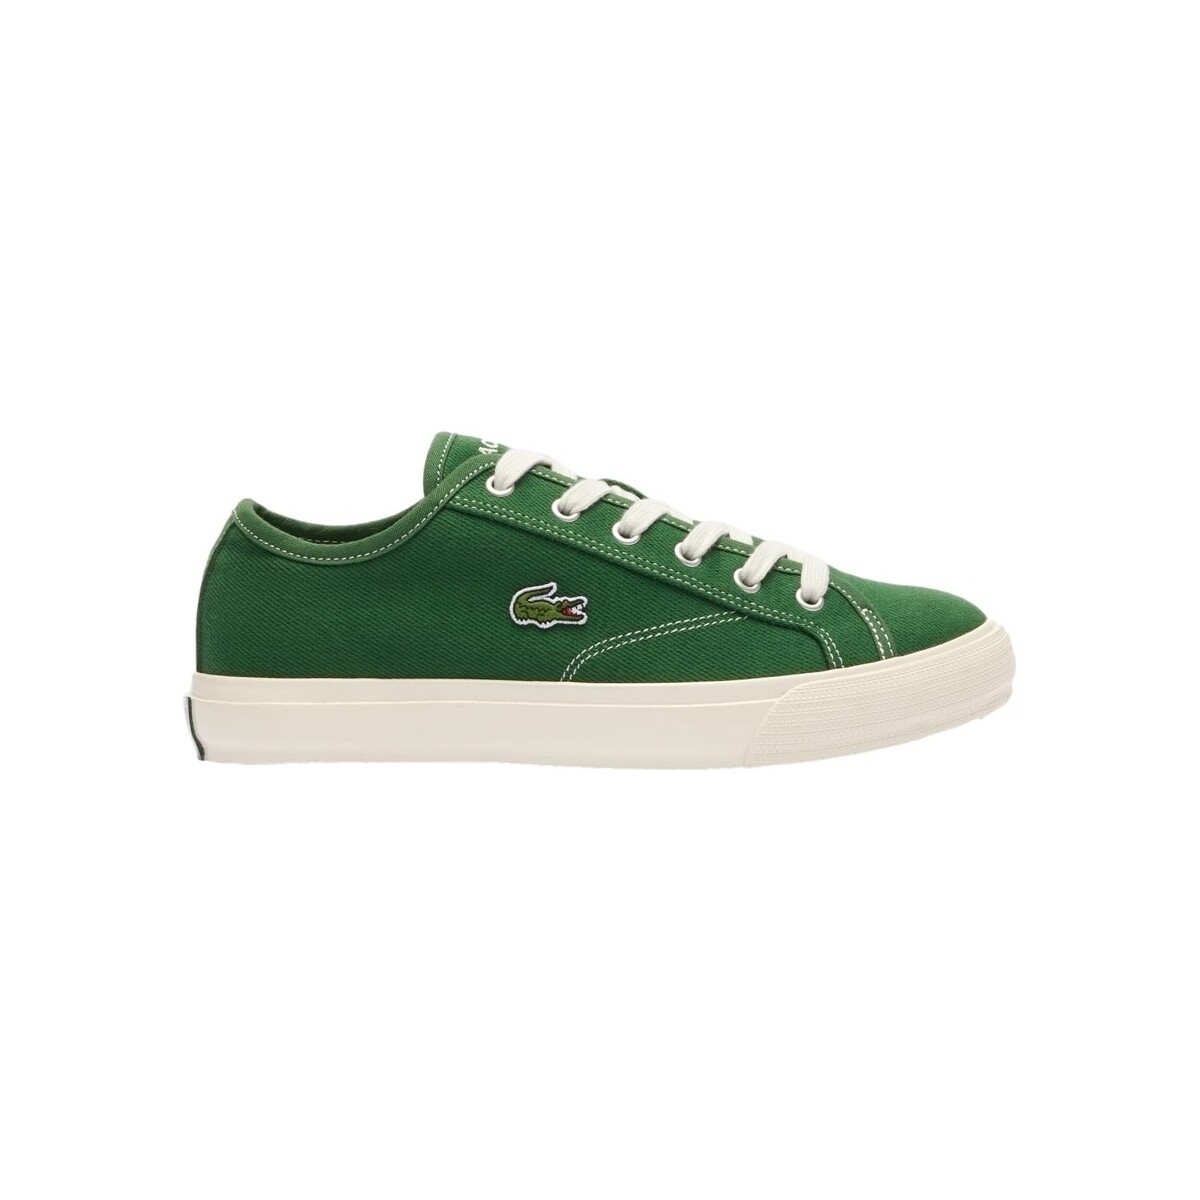 Xαμηλά Sneakers Lacoste Backcourt 124 1 CMA – Green/Off White